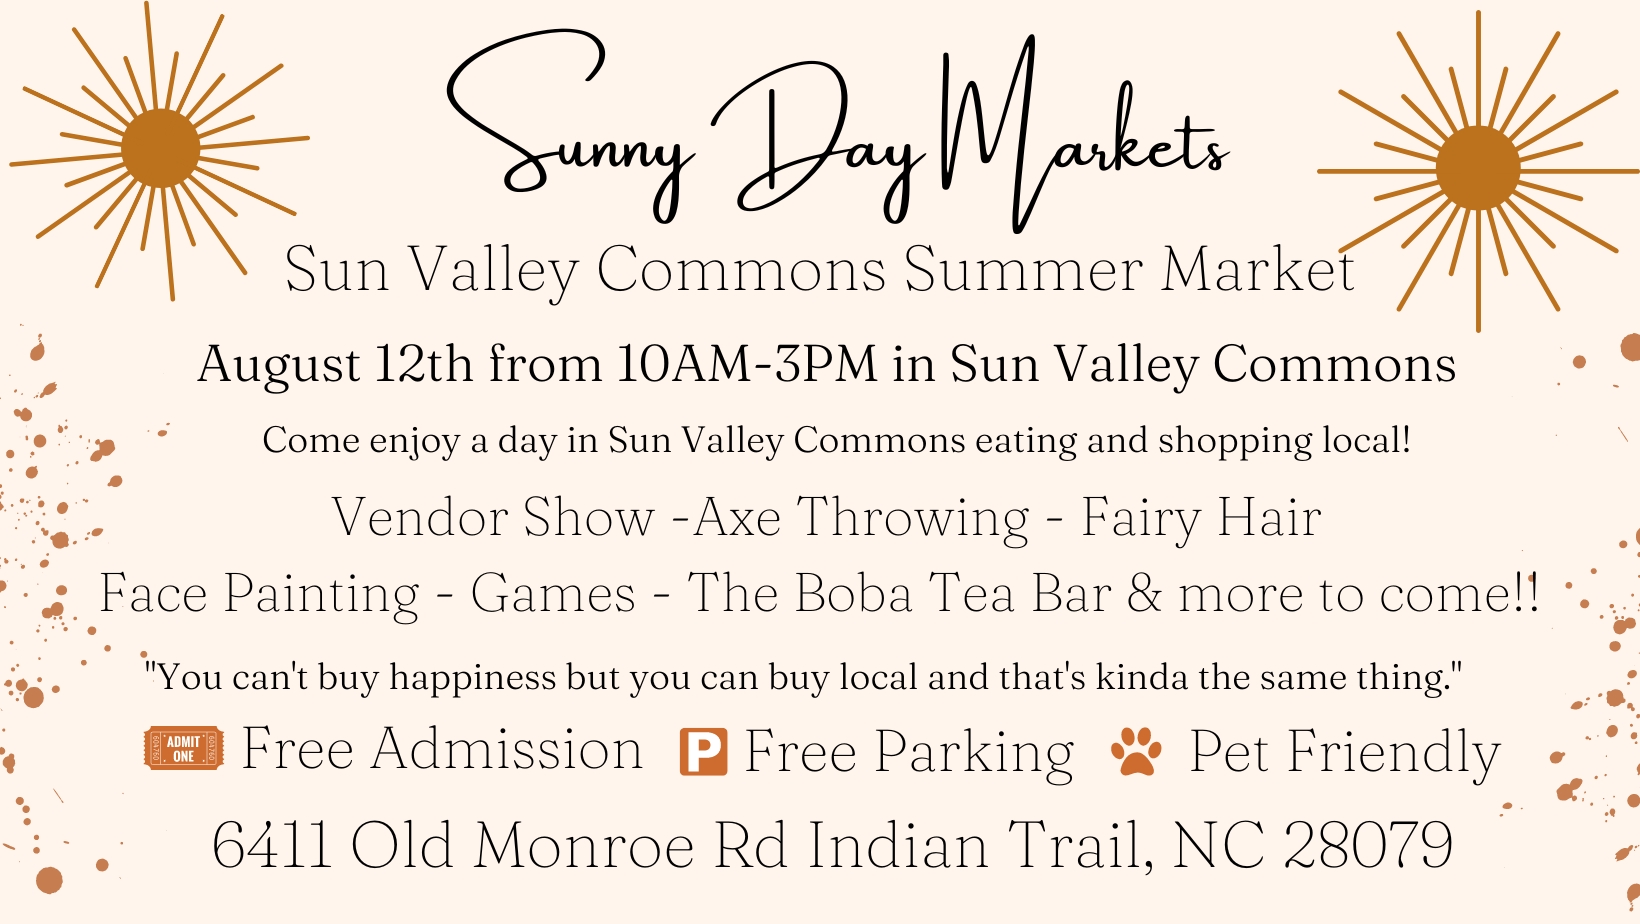 Sun Valley Commons Summer Market cover image